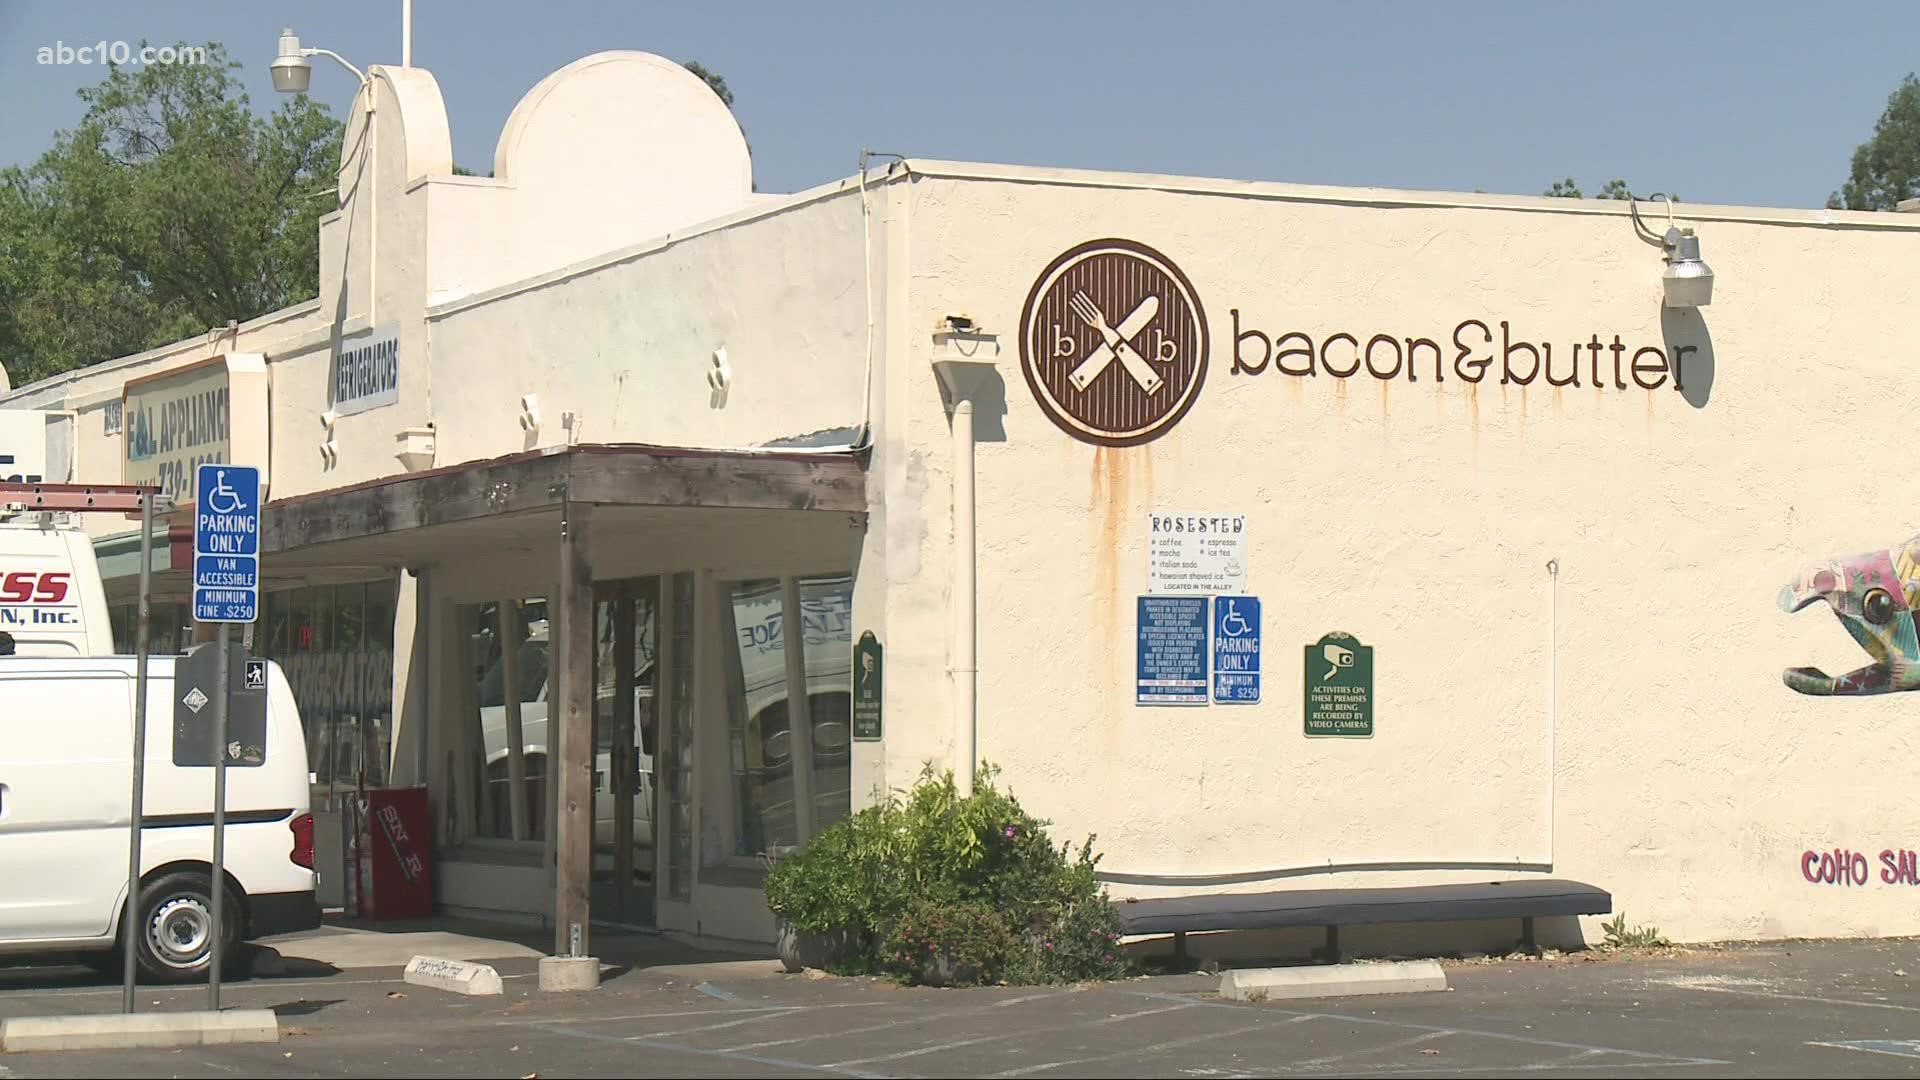 Bacon and Butter plans to reopen on Jan. 5 at 8 a.m.